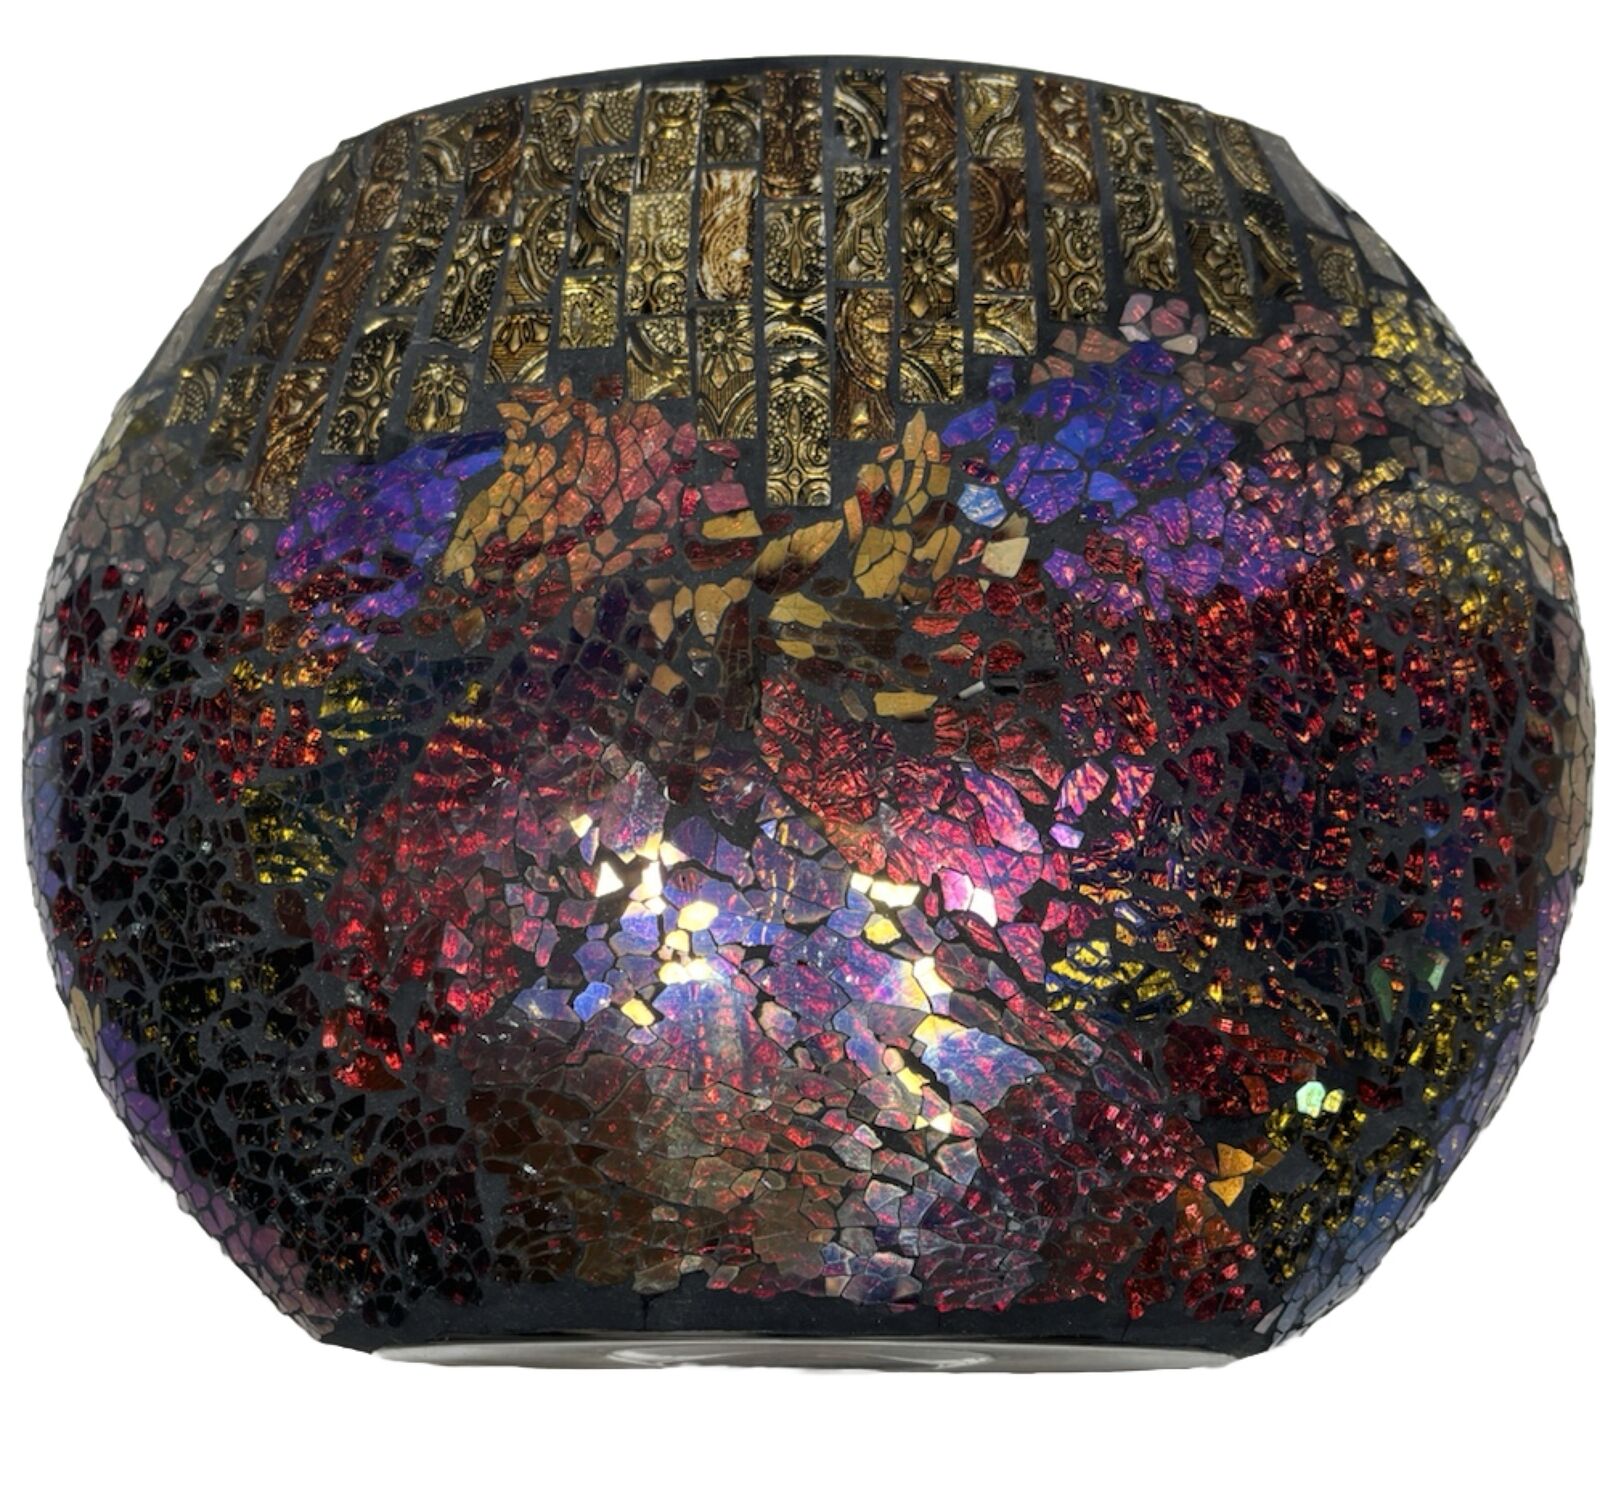 Gorgeous Mosaic Glass Vase 12”x9” With Gold, Blue, Purple, Red Orange Accents